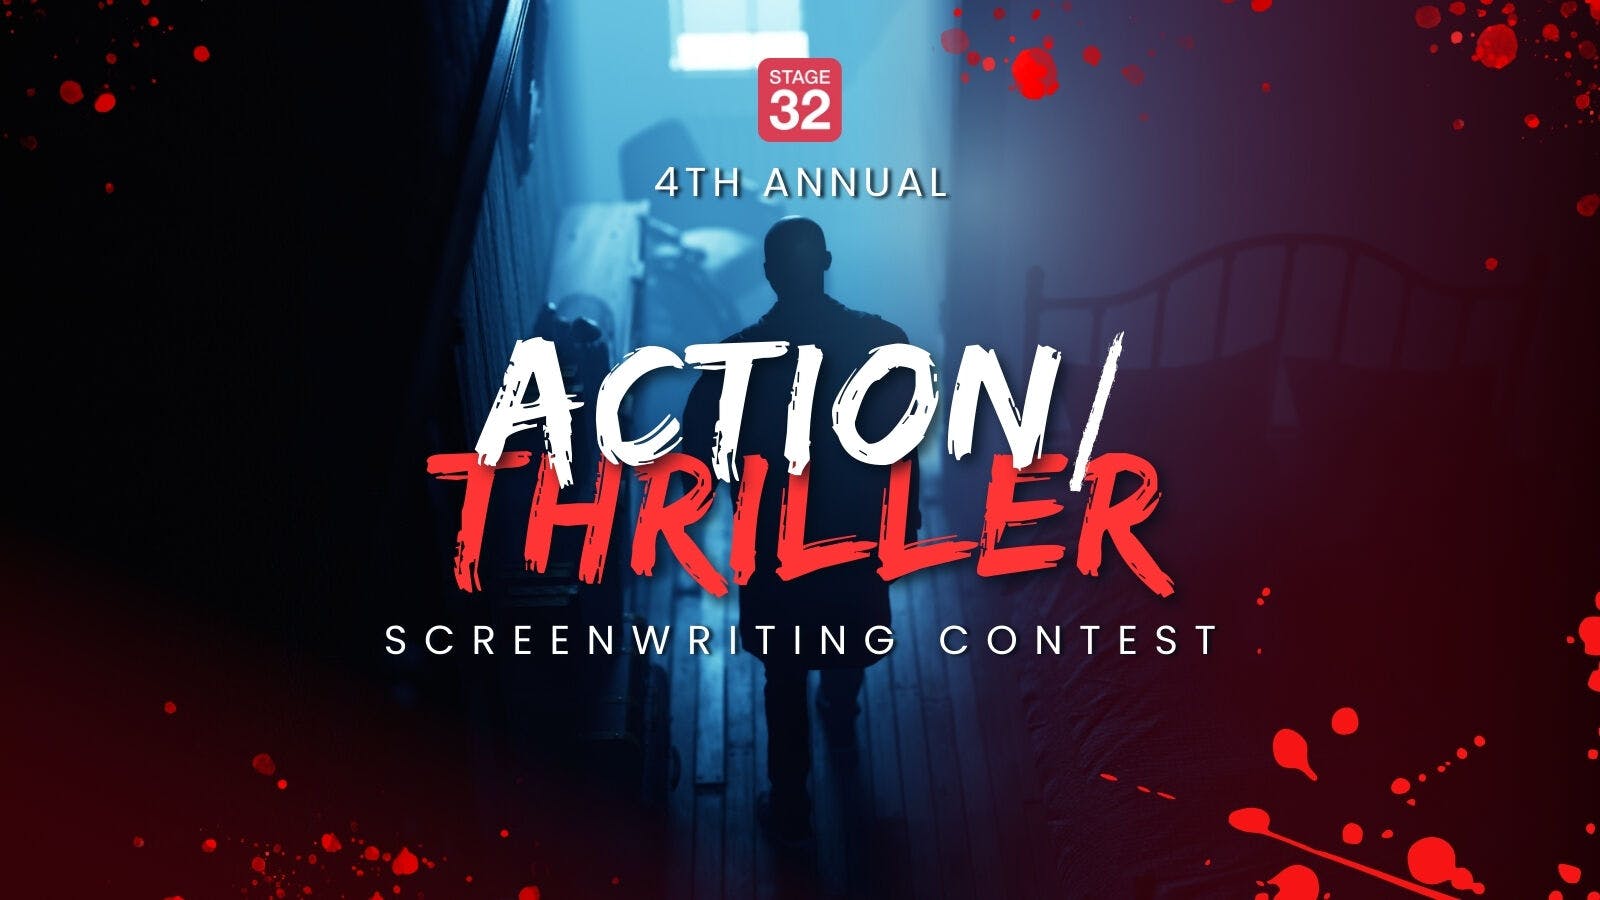 Announcing the 4th Annual Action/Thriller Screenwriting Contest